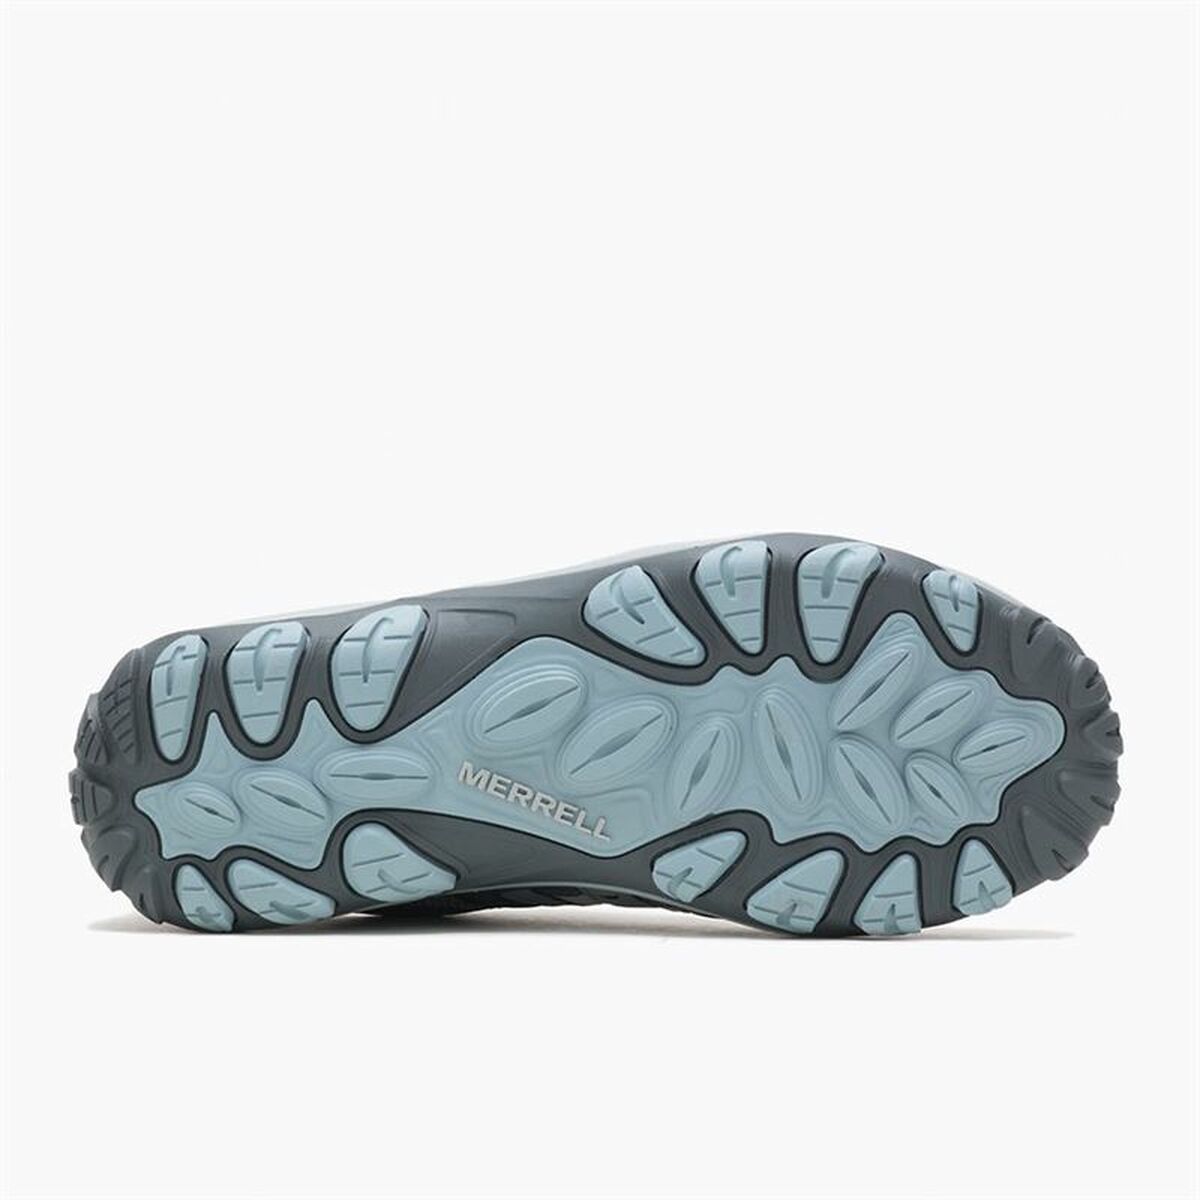 Sports Trainers for Women Merrell Accentor Sport 3 Grey